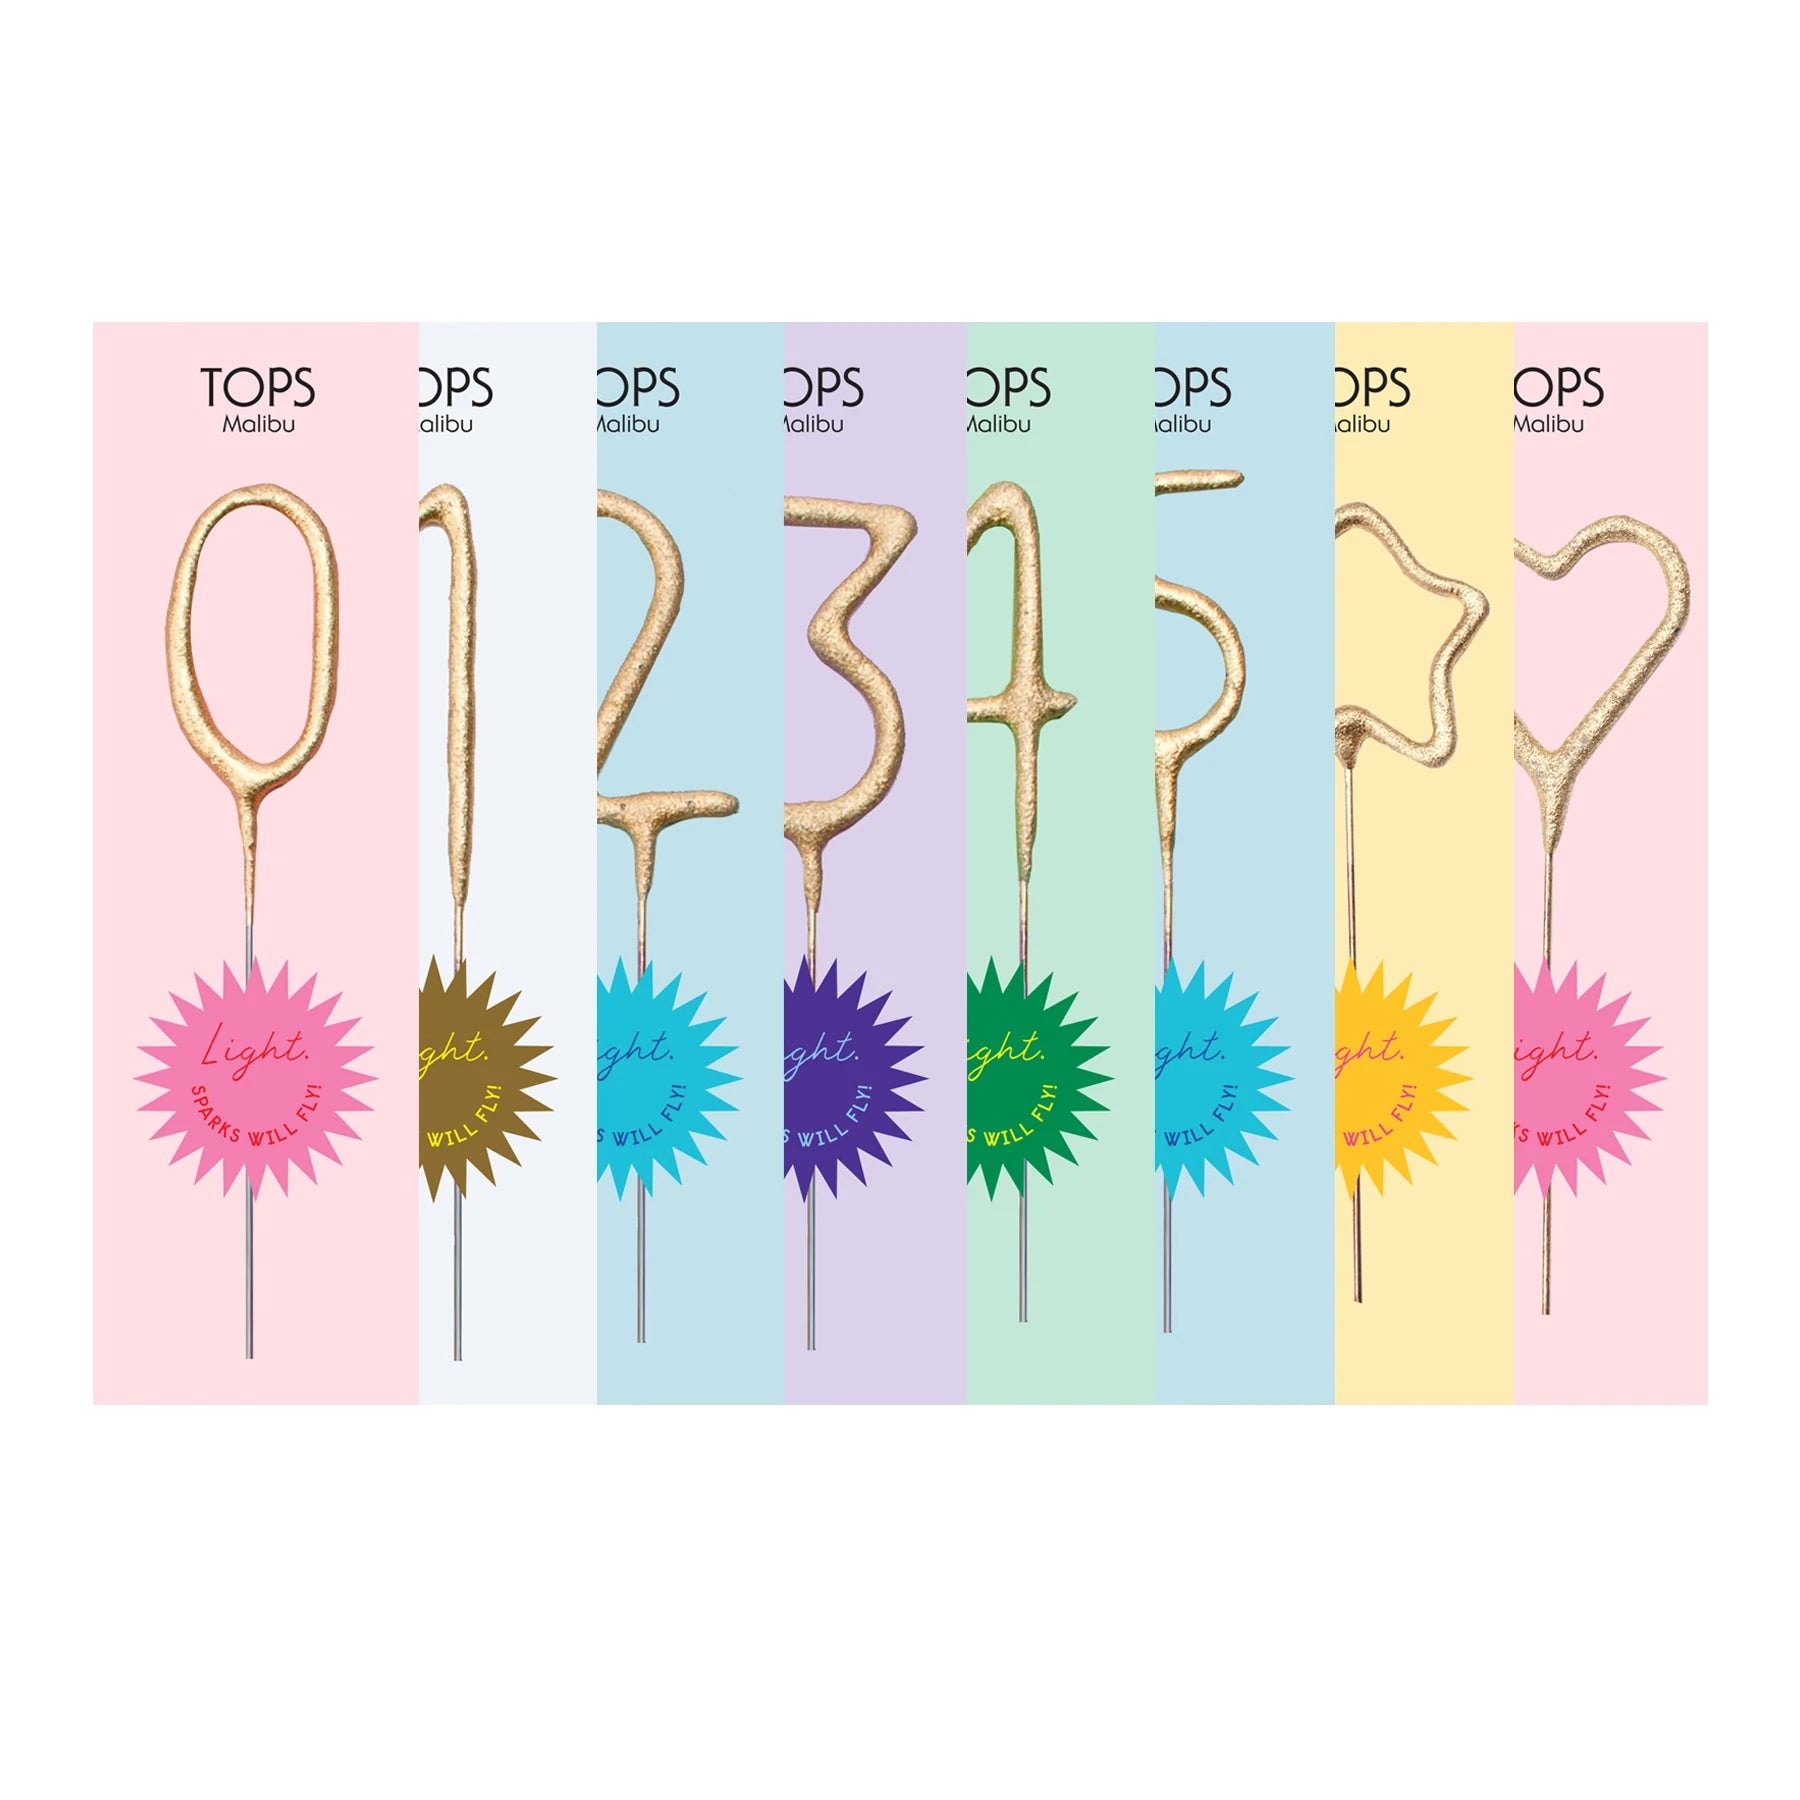 Mini Gold Number Sparkler Wand 4" by TOPS Malibu. Number Candle Sparklers. Shape Candle Sparklers. Celebration Sparklers for all occasions